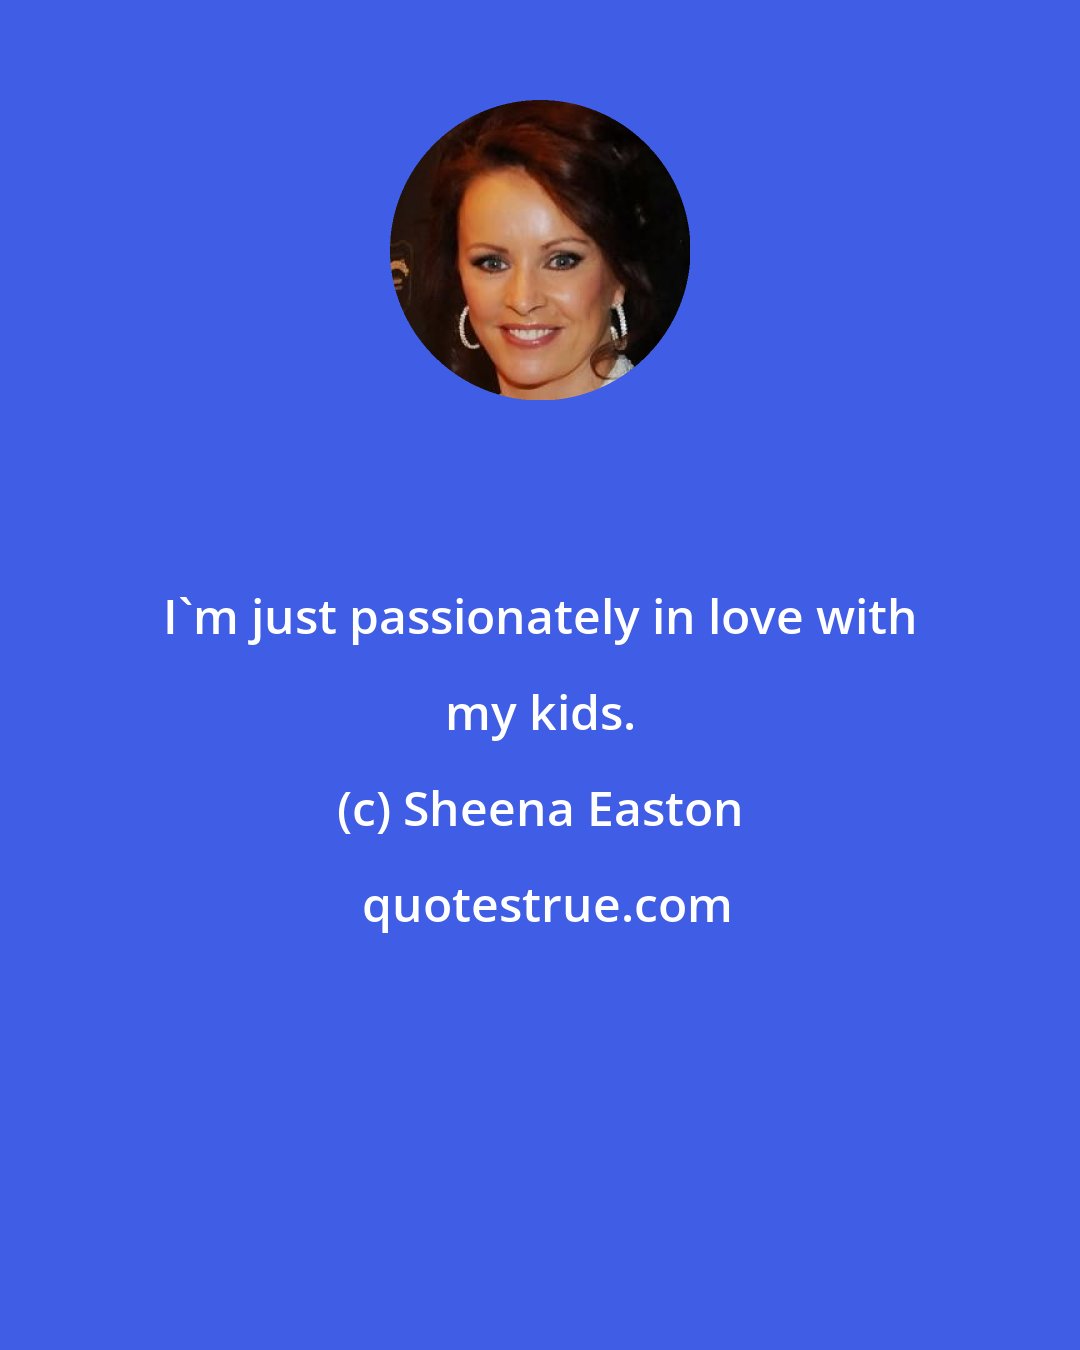 Sheena Easton: I'm just passionately in love with my kids.